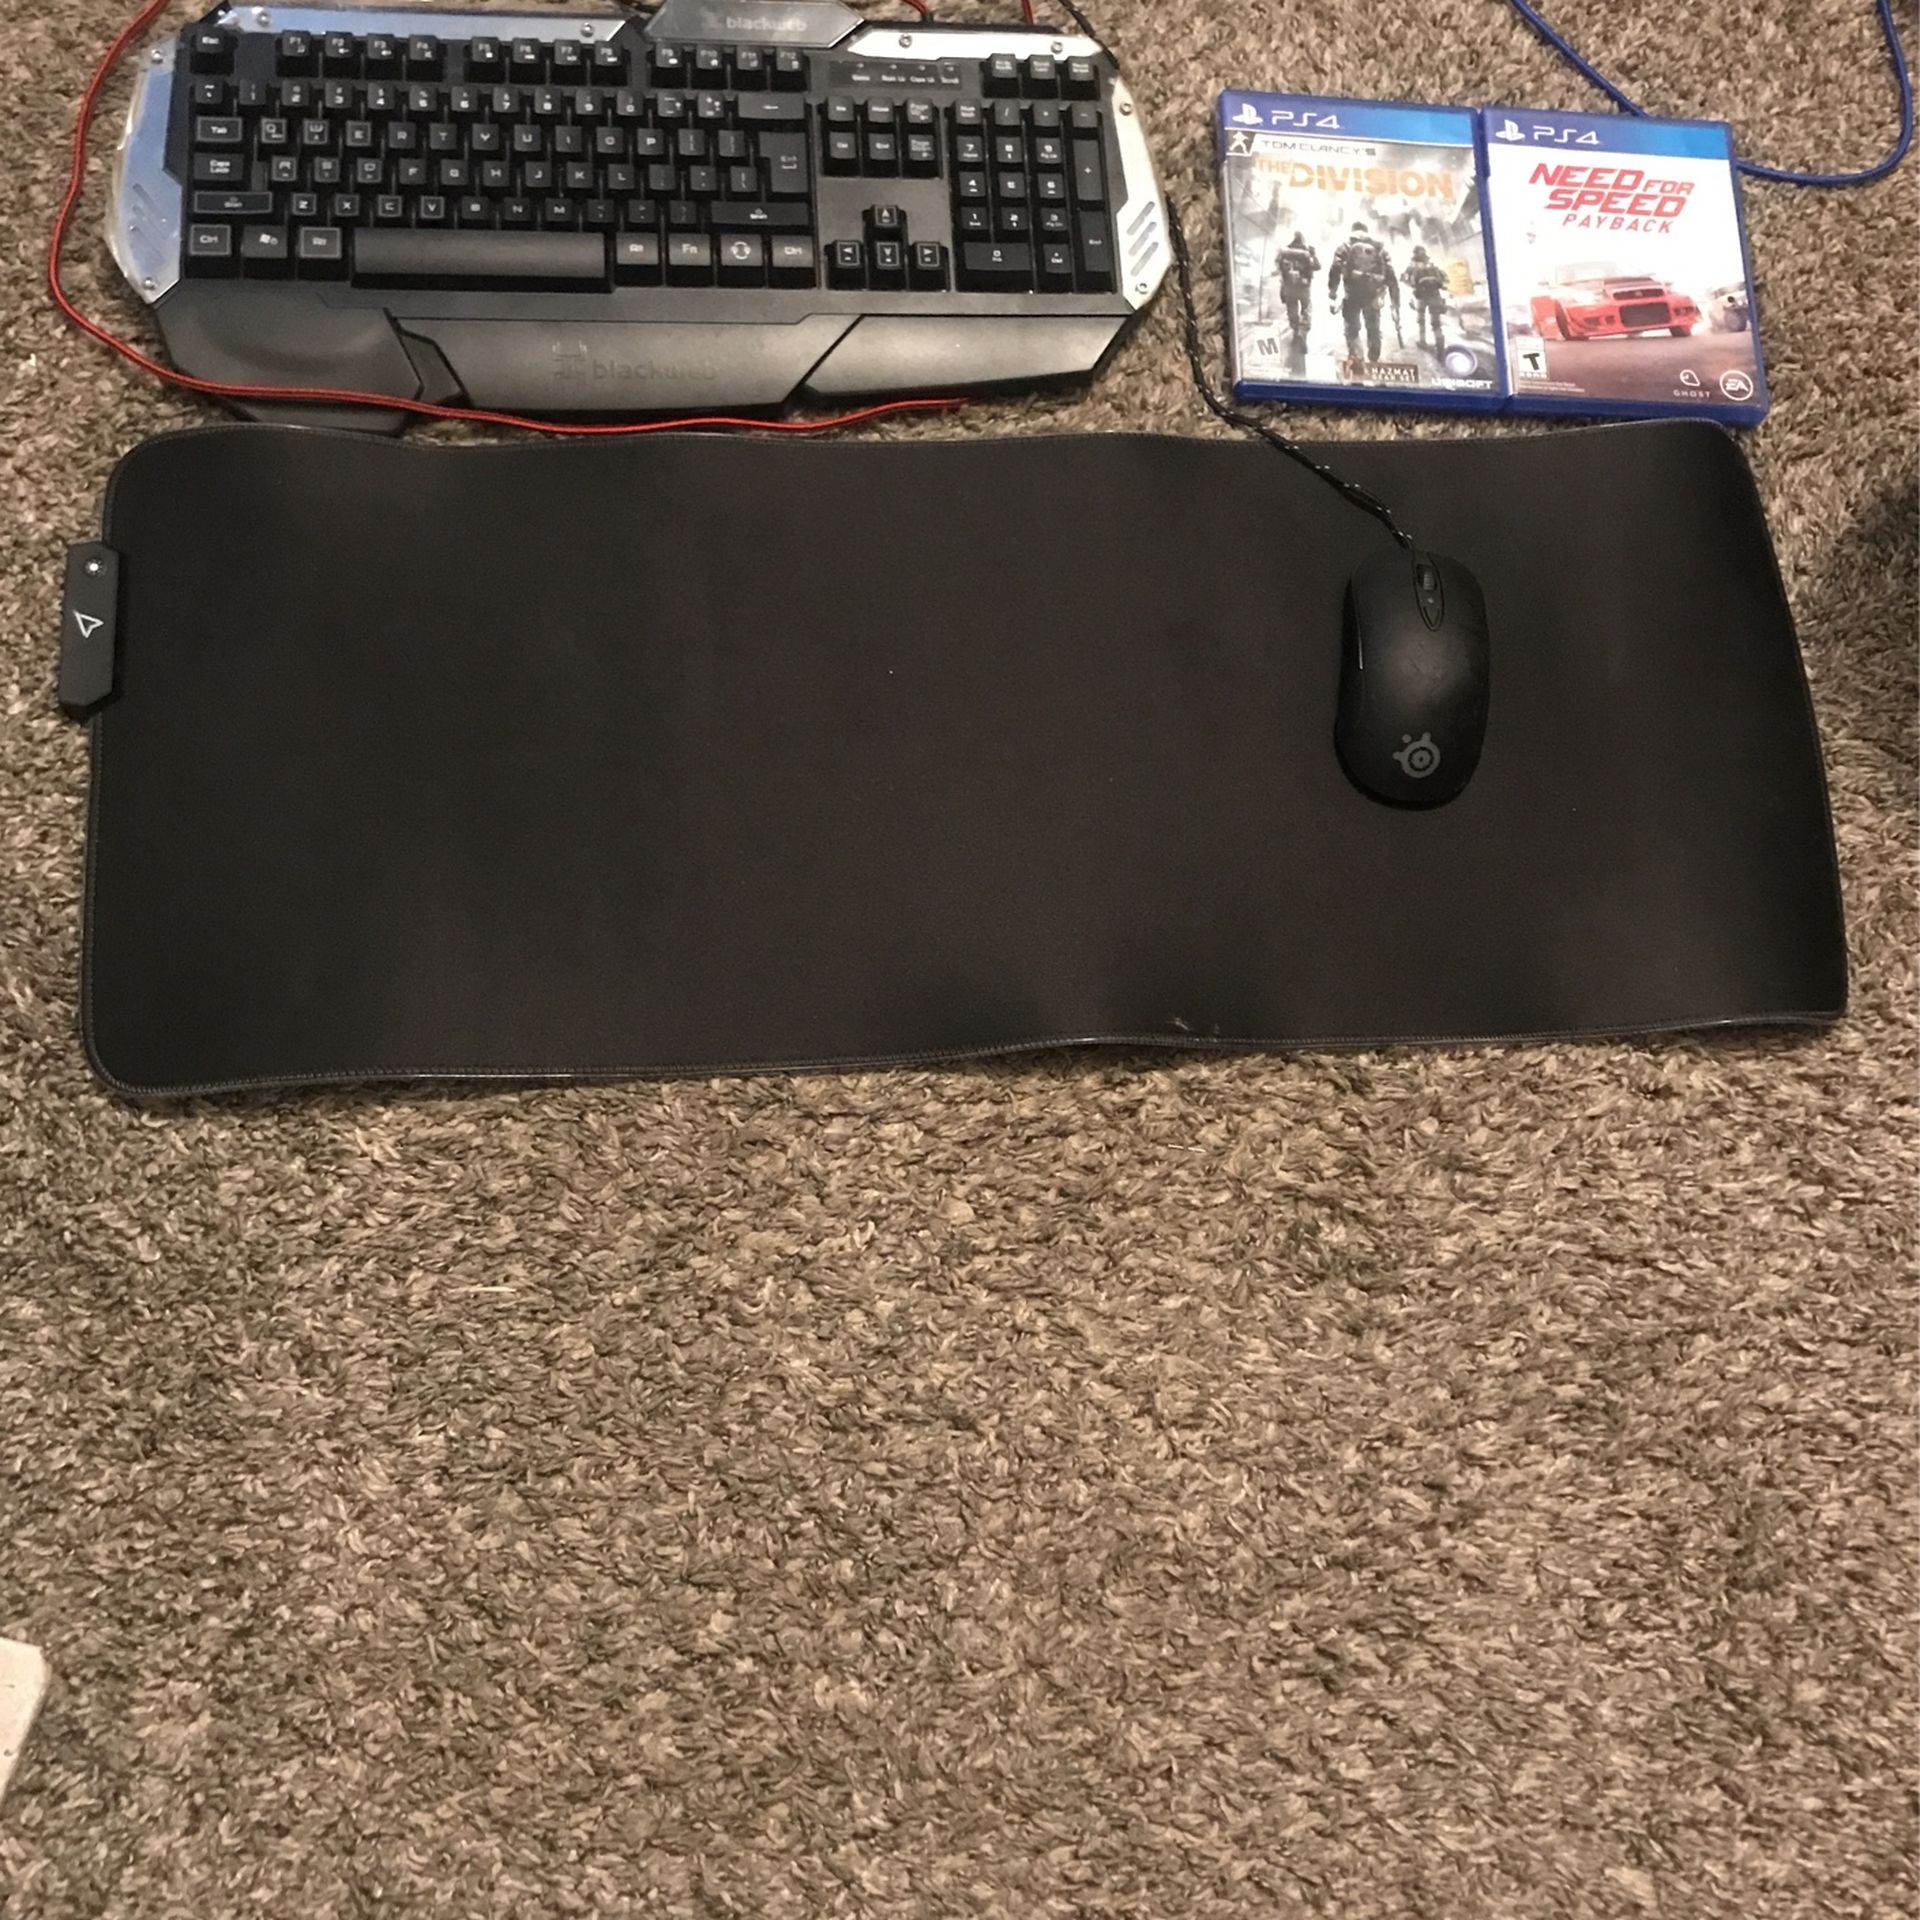 Gaming Keyboard,gaming Mouse, Gaming Mouse Pad. Need For Spleen Brand New, The Division 